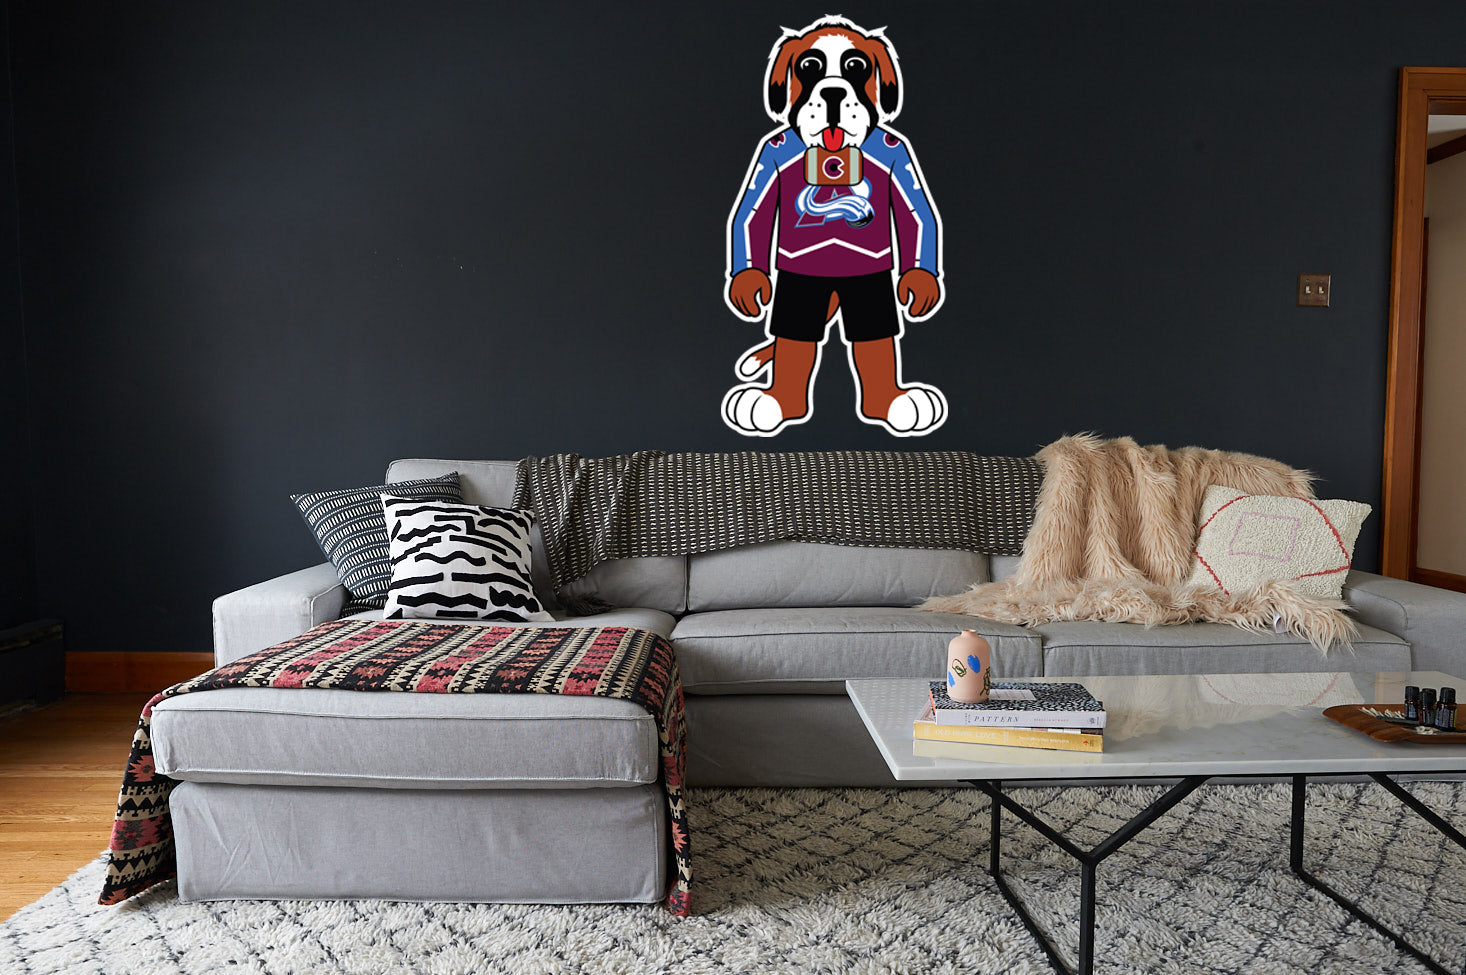 Colorado Avalanche: Bernie 2021 Mascot - NHL Removable Wall Adhesive Wall Decal Giant Athlete +2 Wall Decals 21W x 51H